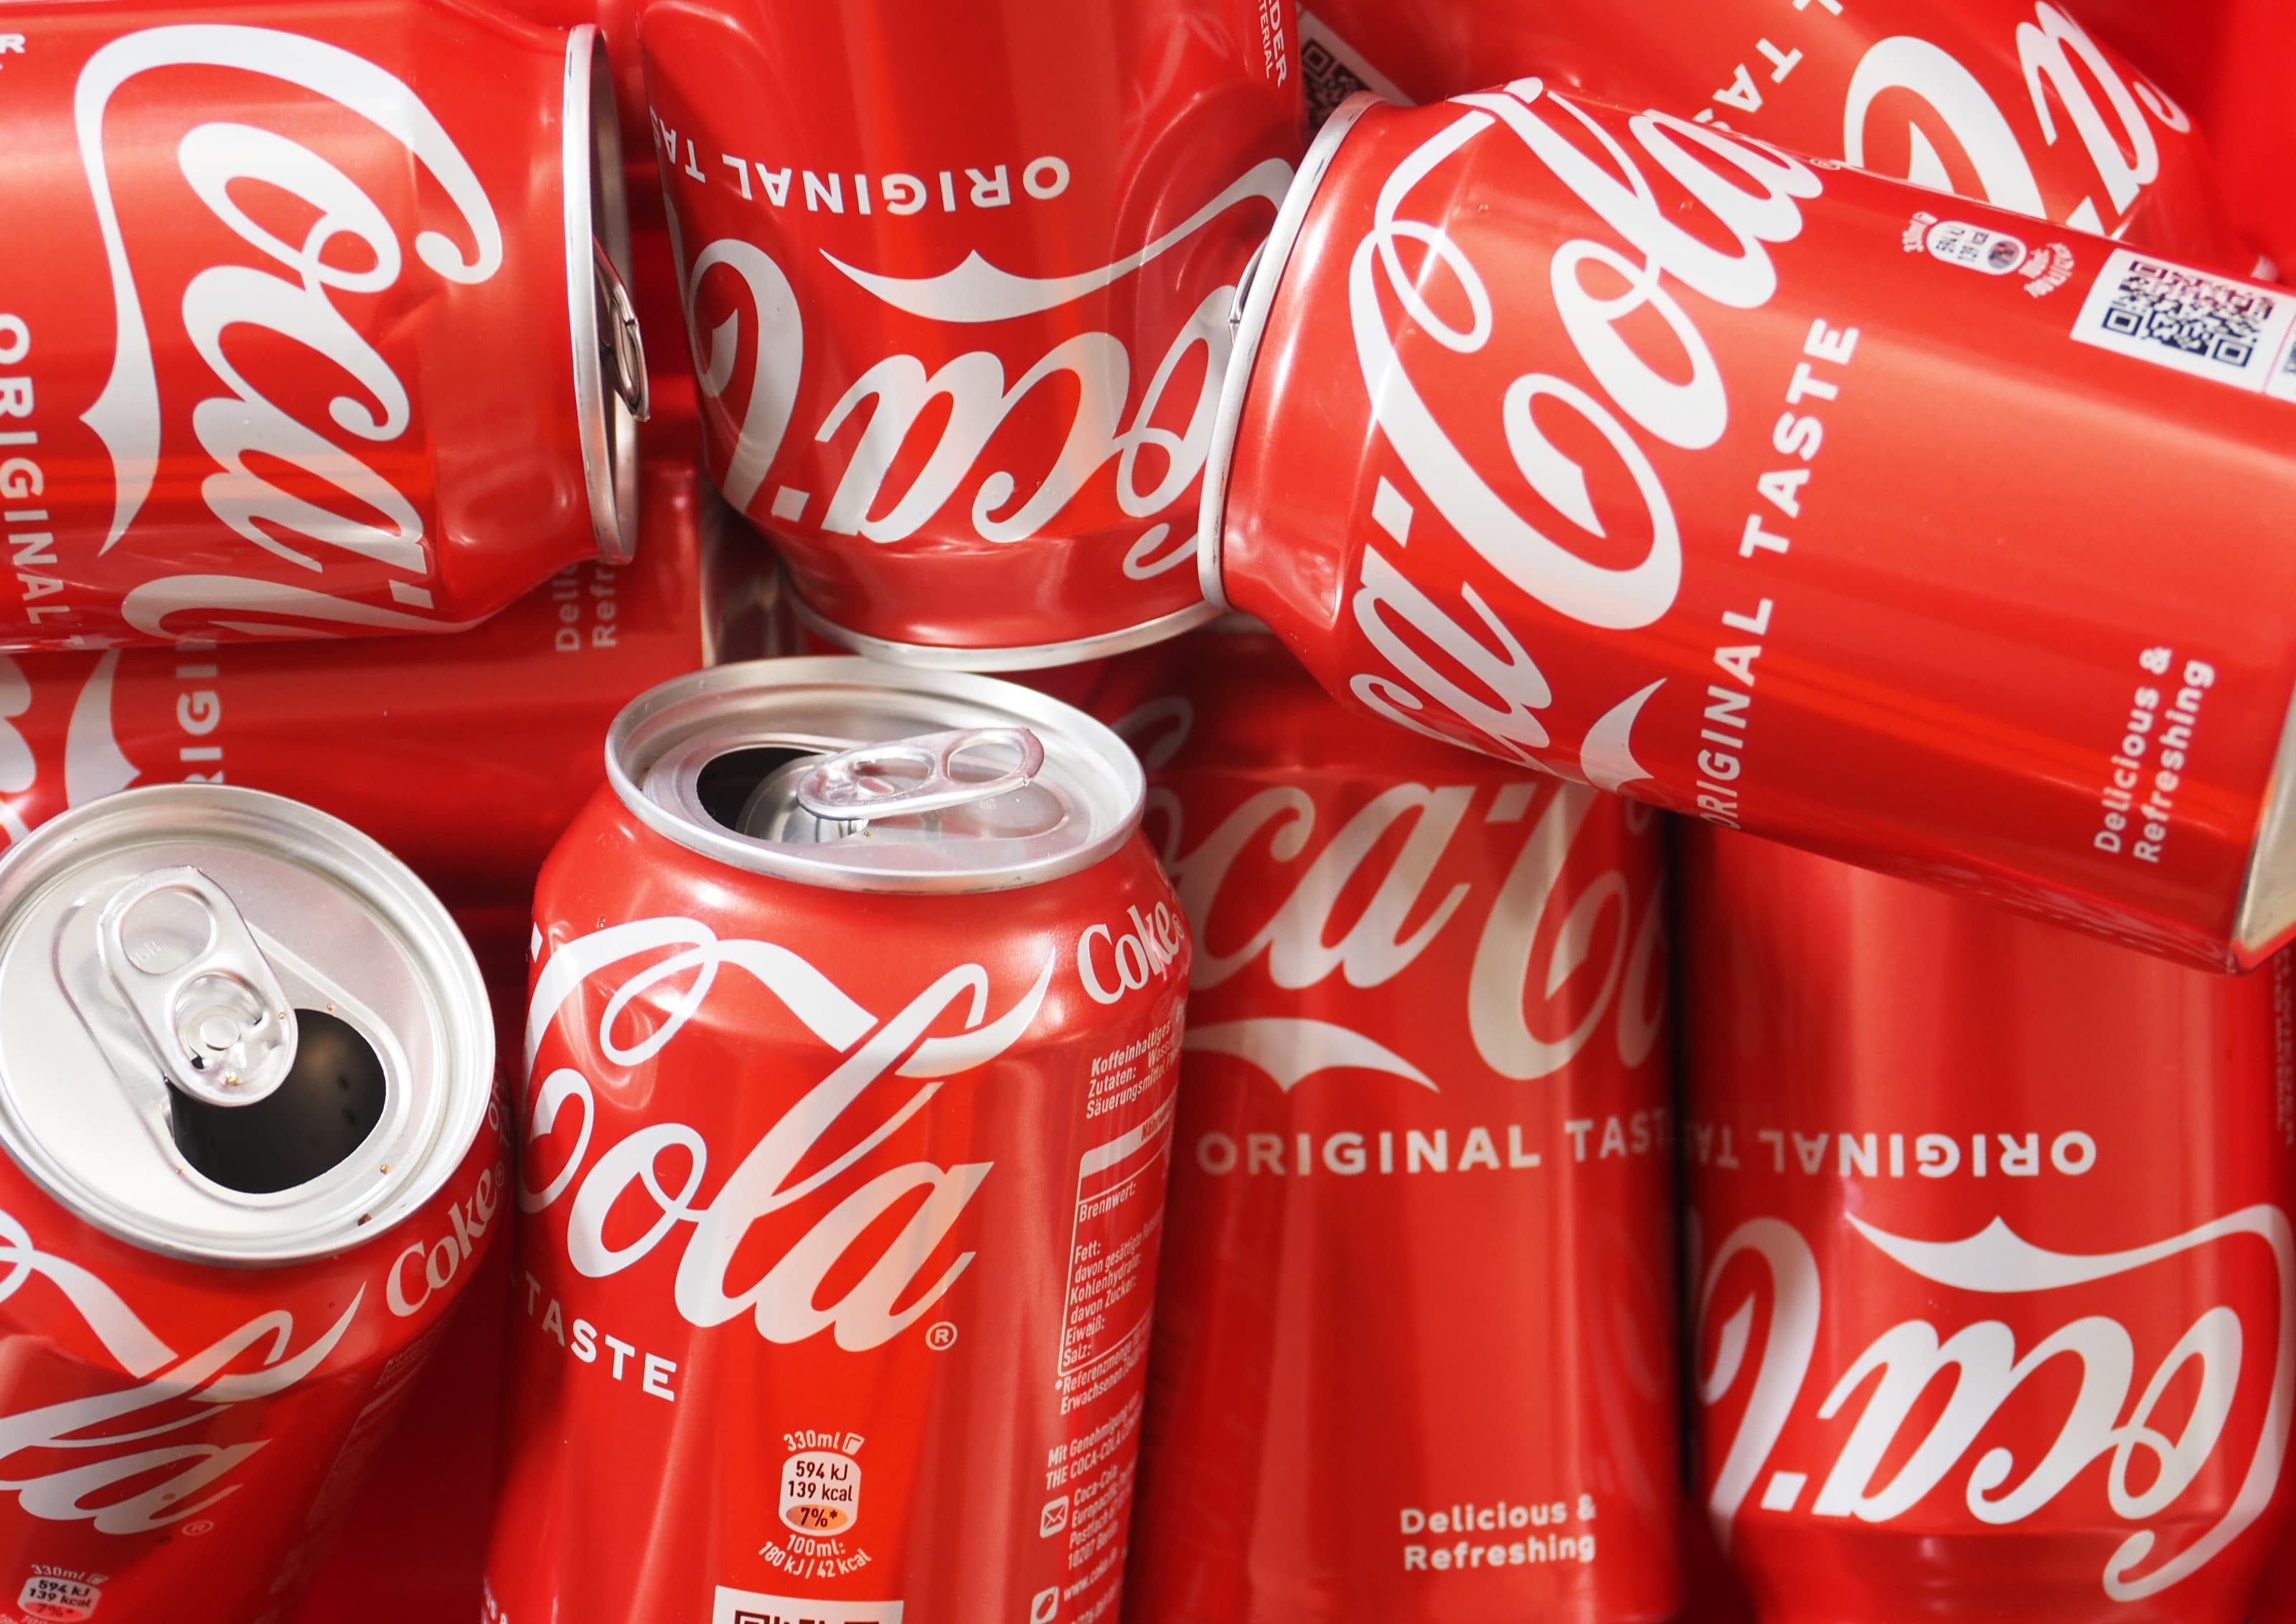 How To Make Amazing Cups Using Soda Cans and earn money 